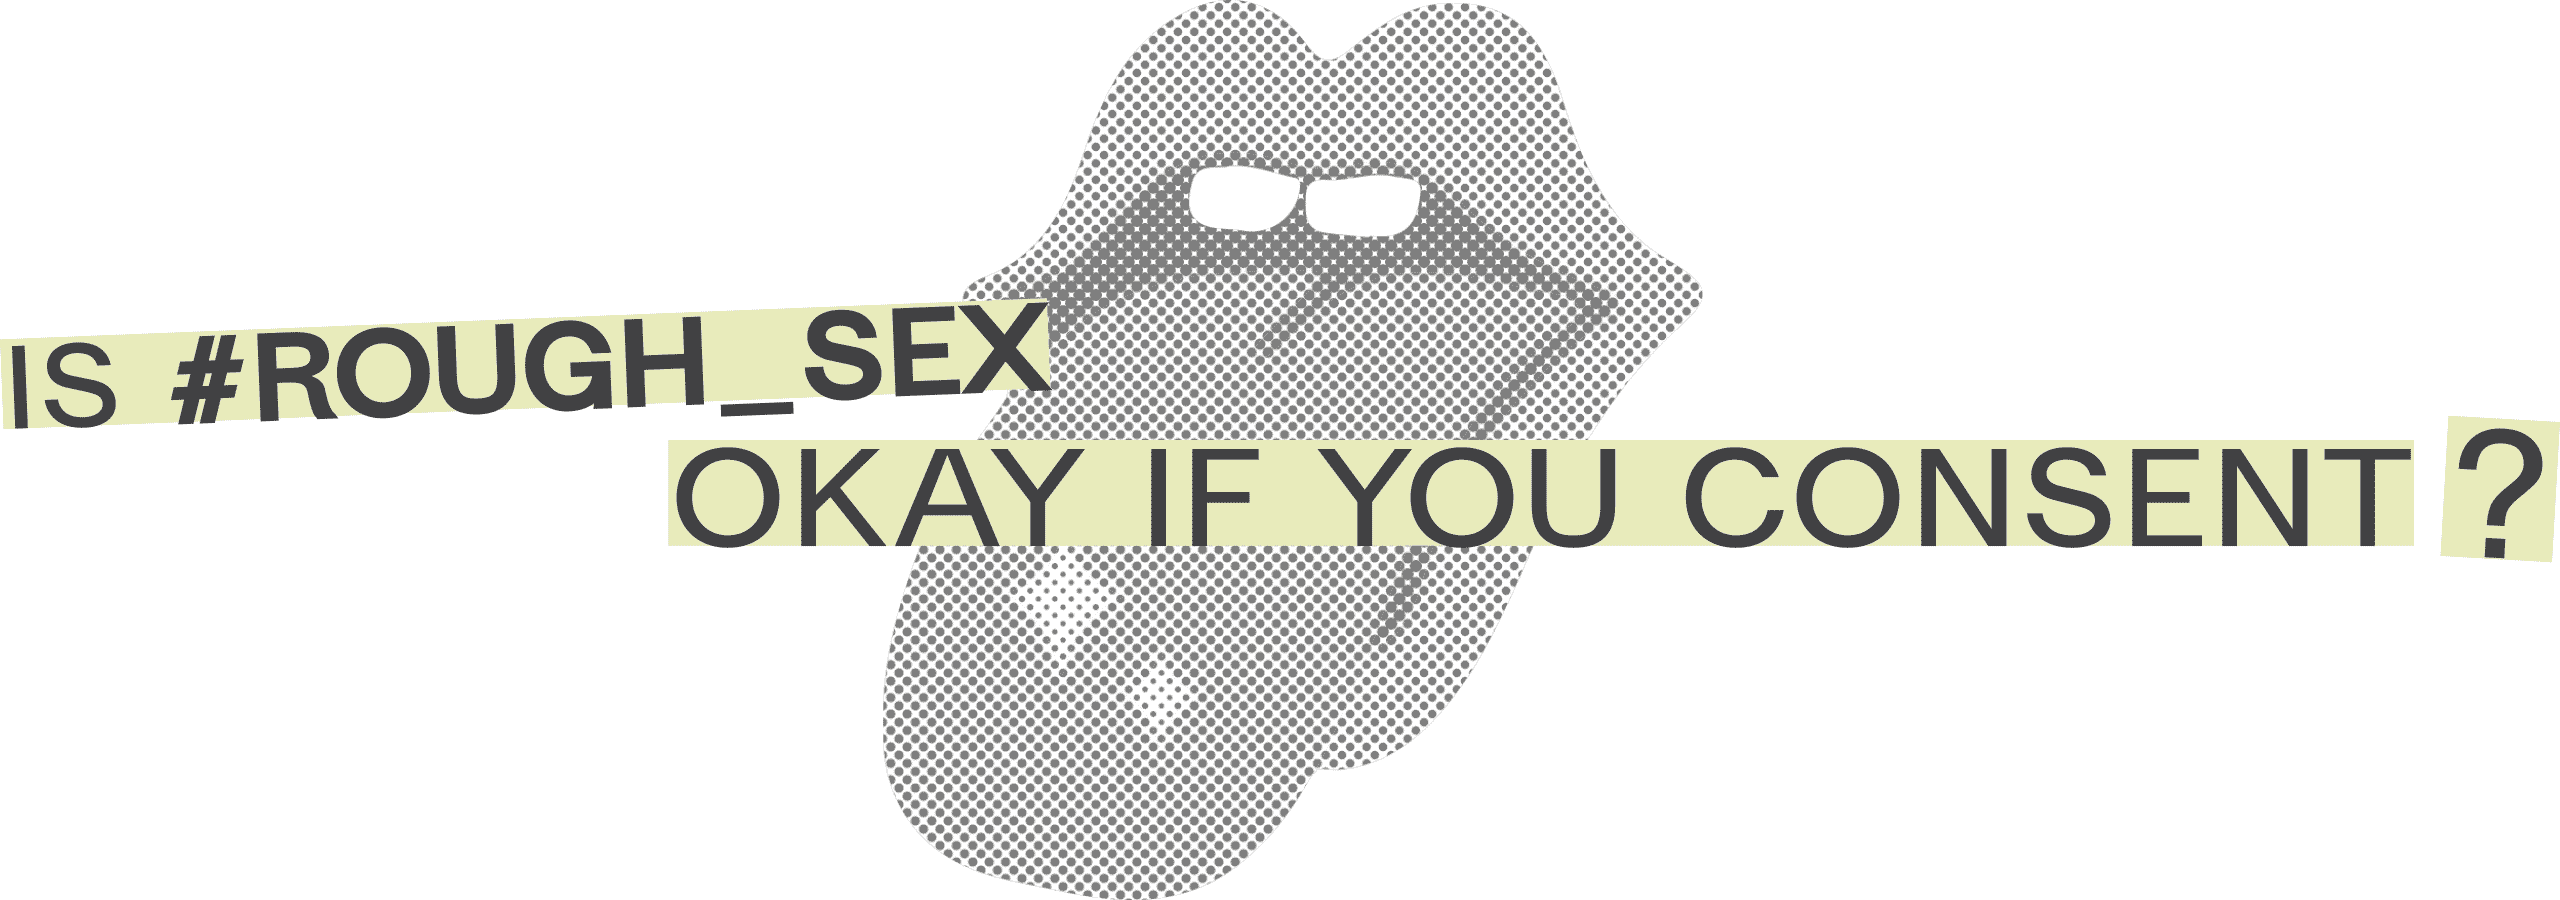 Is rough sex ok if you consent?